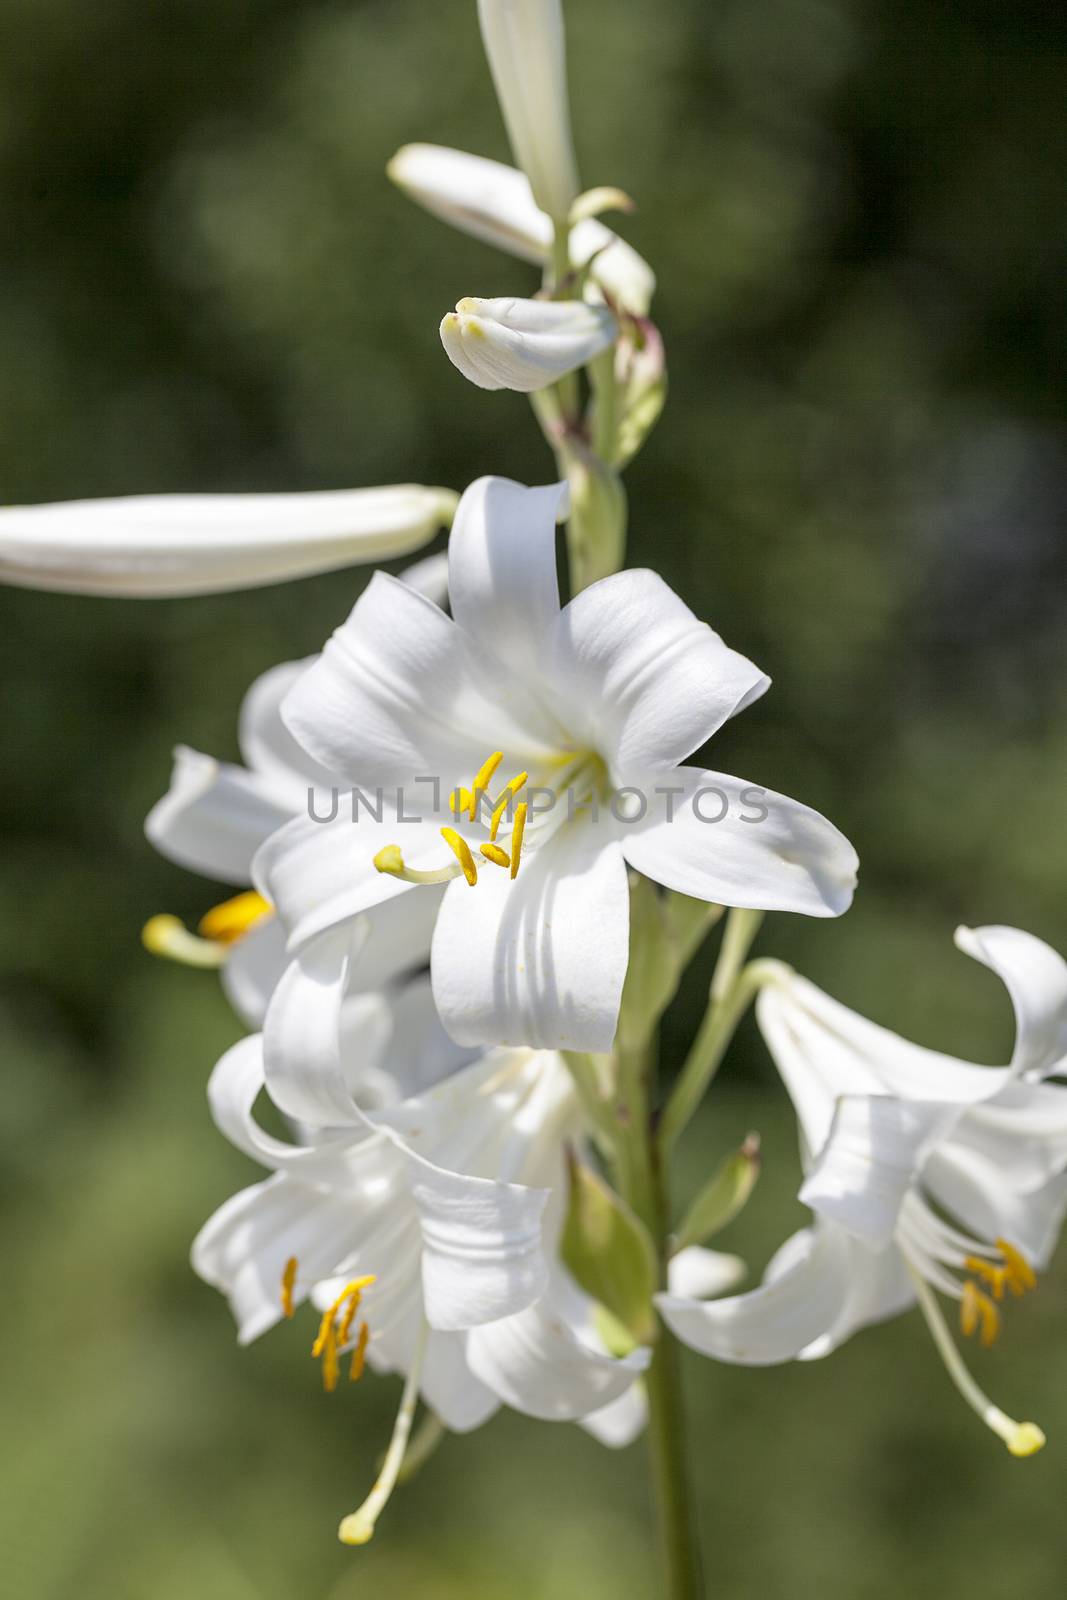 Flowers of white Lilium candidum blooming in the garden .